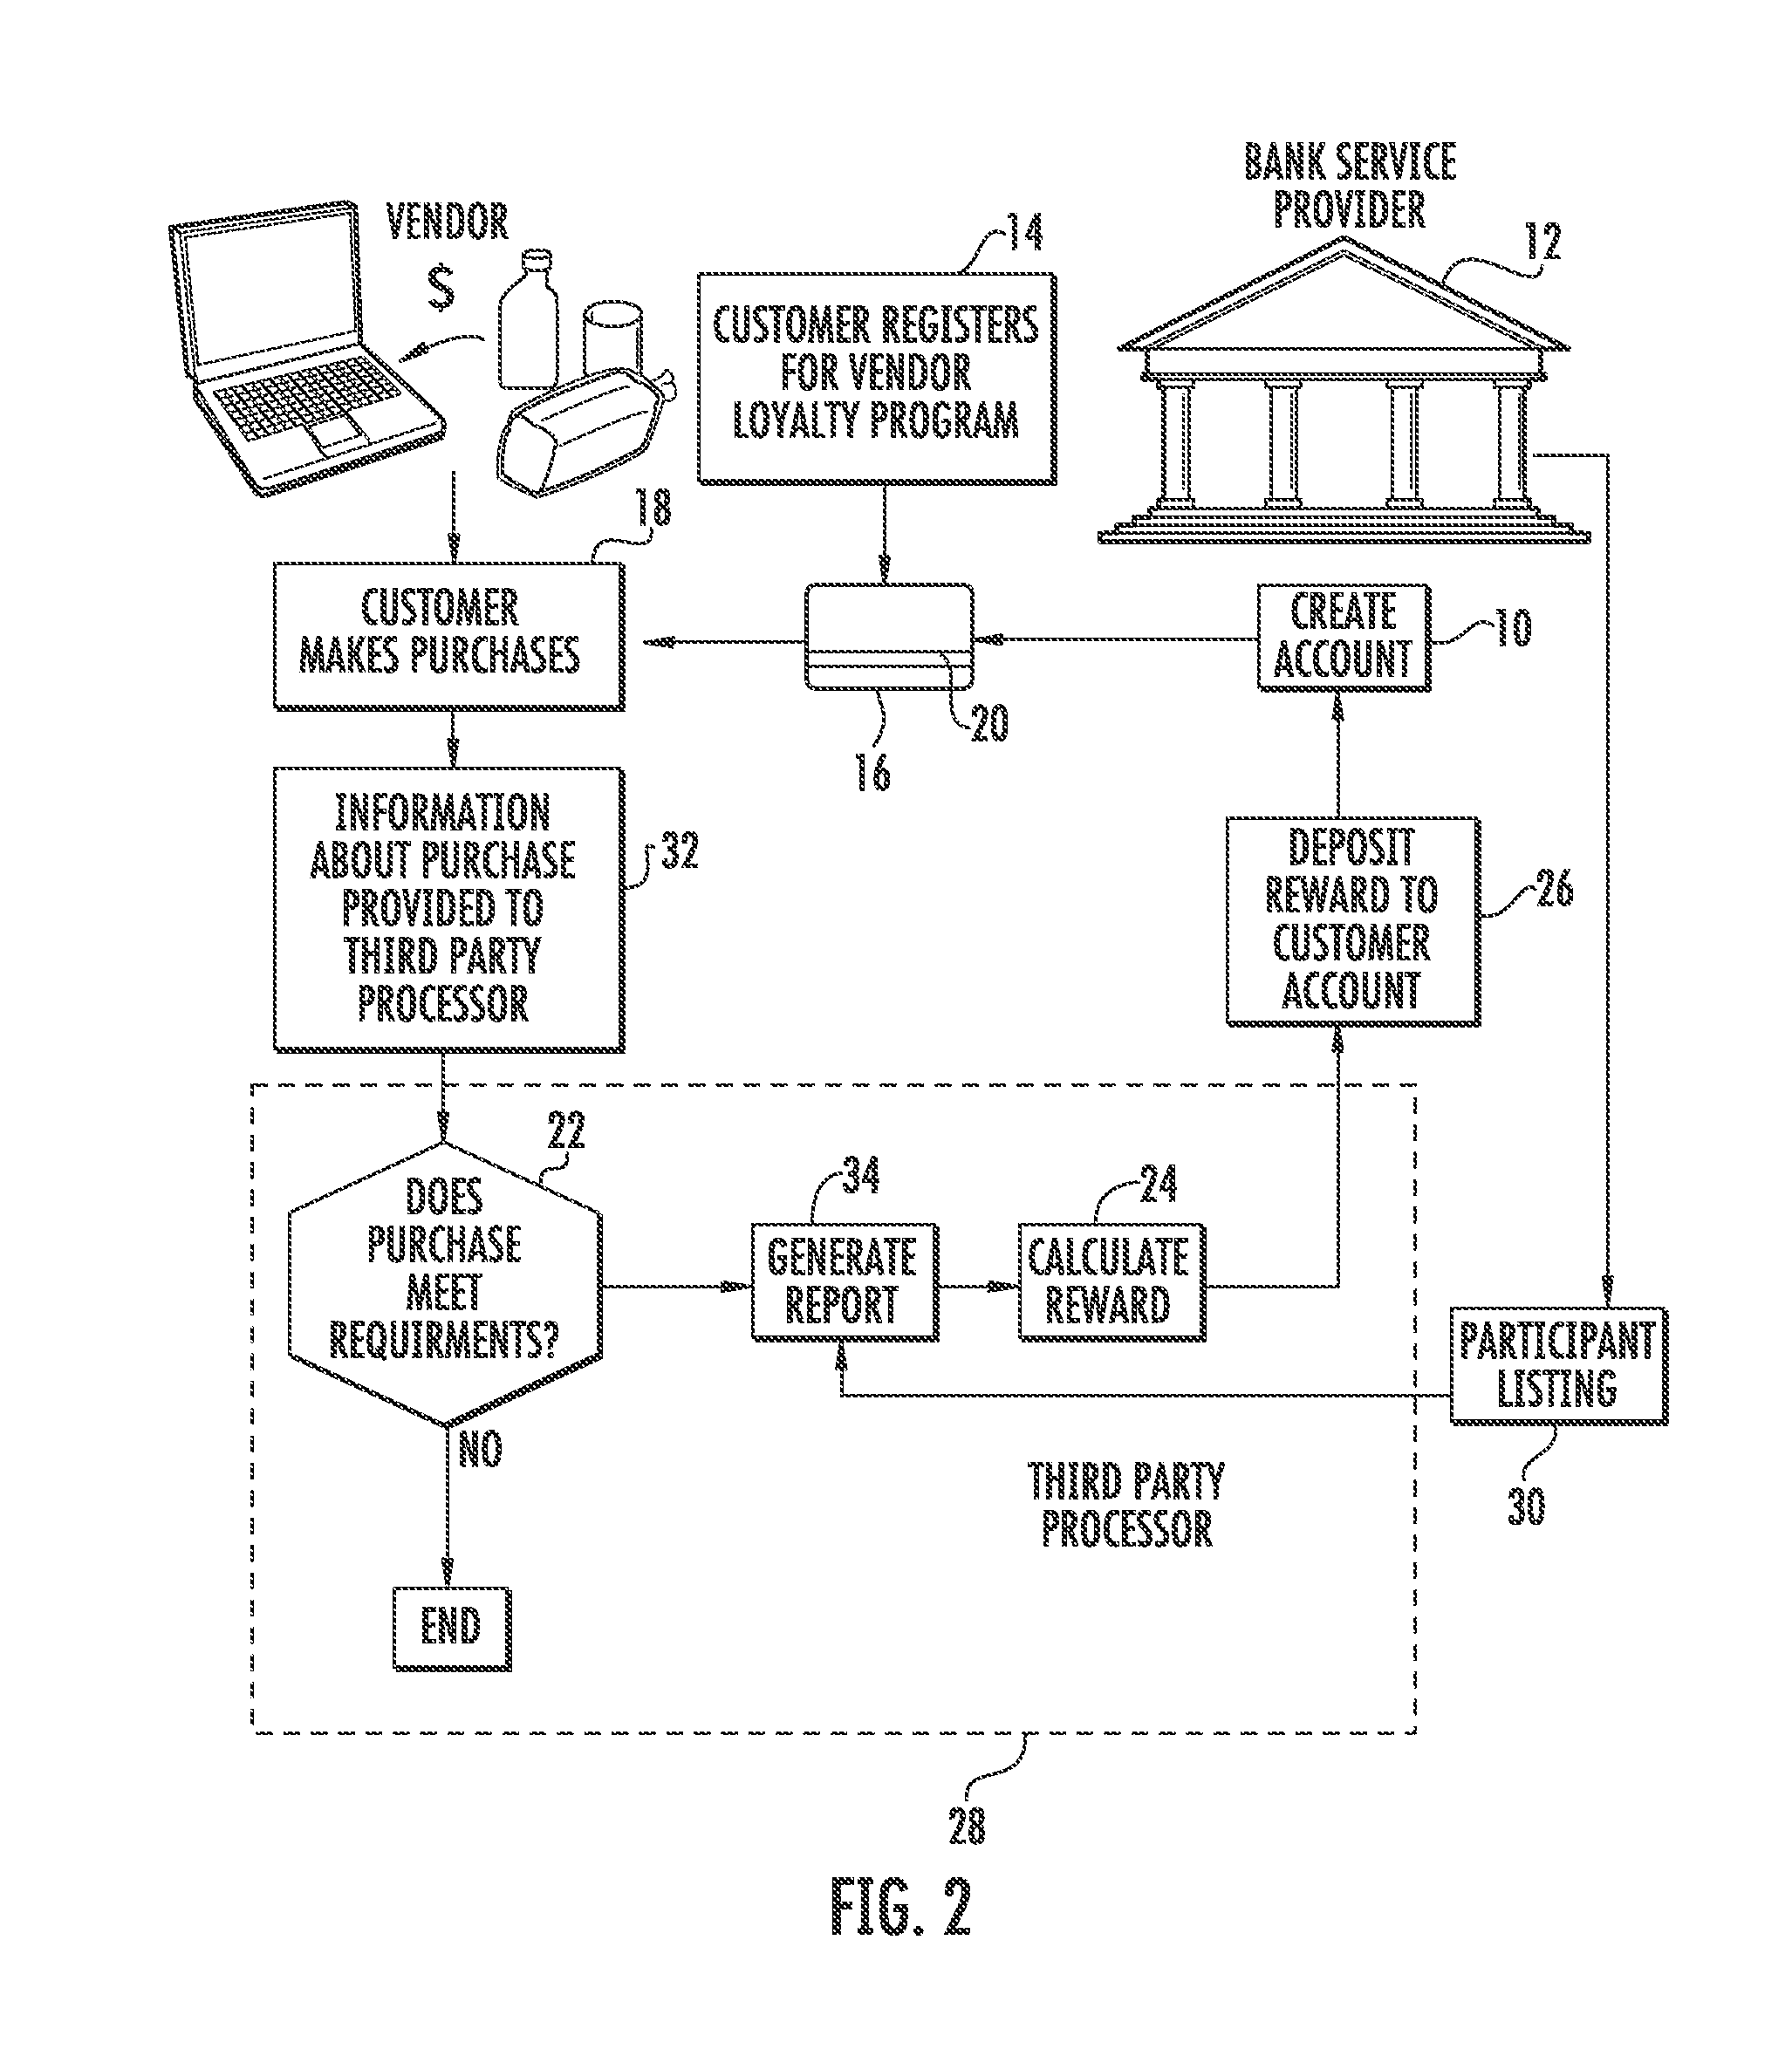 Method of conducting a transaction that results in customer rewards